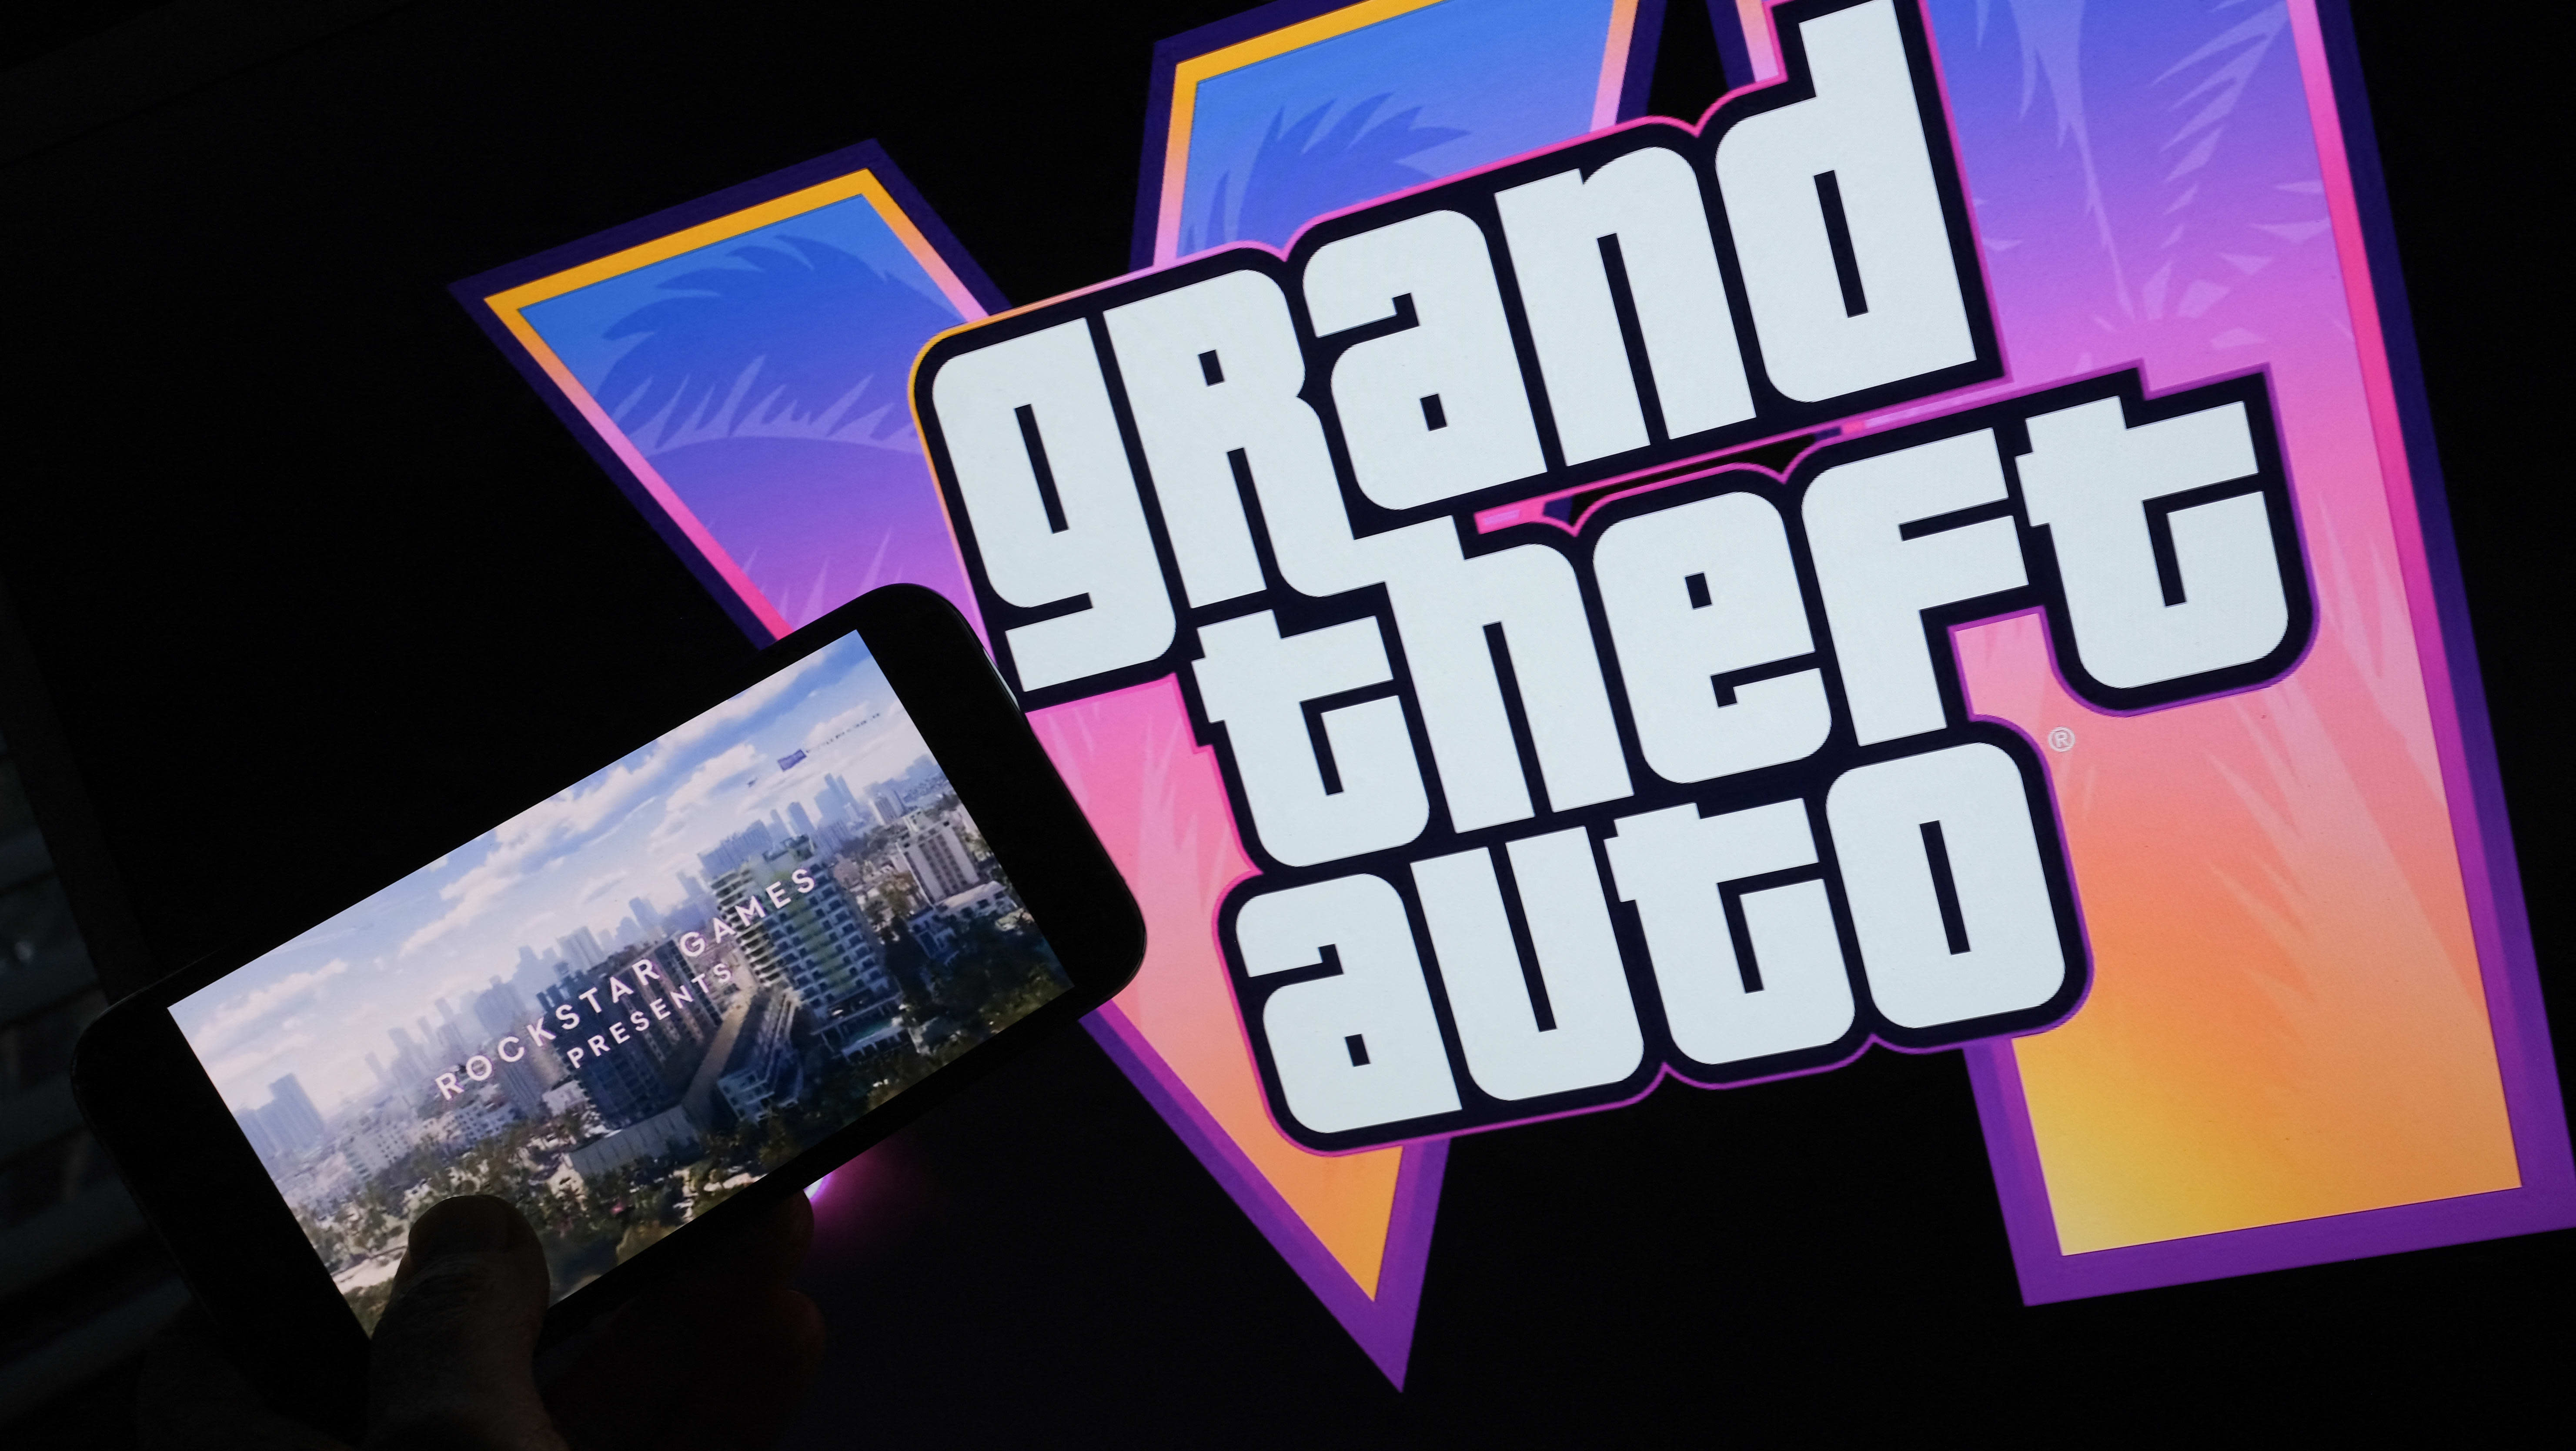 GTA VI trailer released early after leak: What the game means for Take-Two